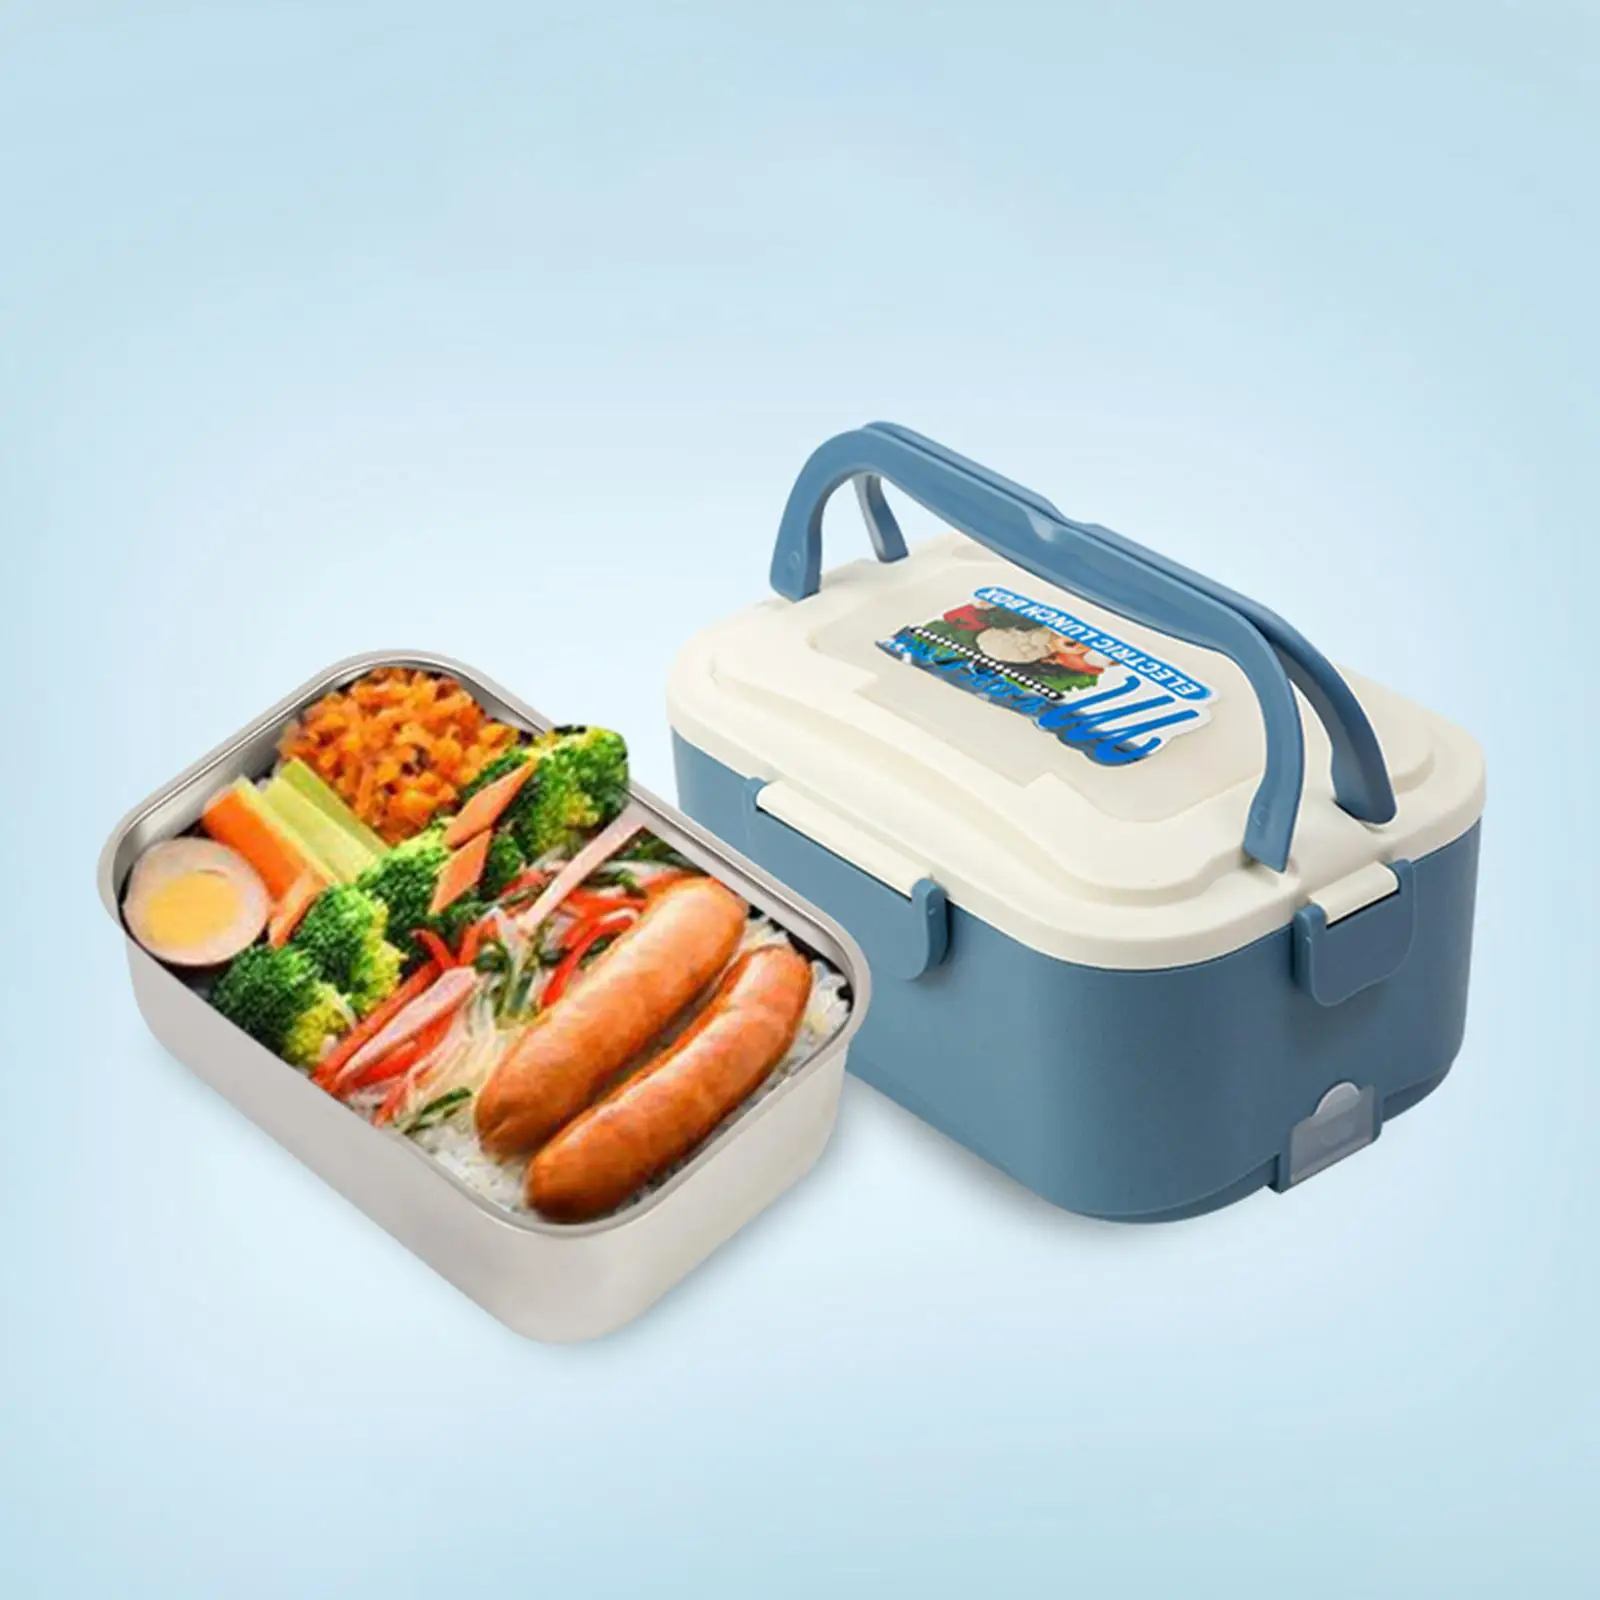 Lunch Box Removable Stainless Steel Container for Home Traveling